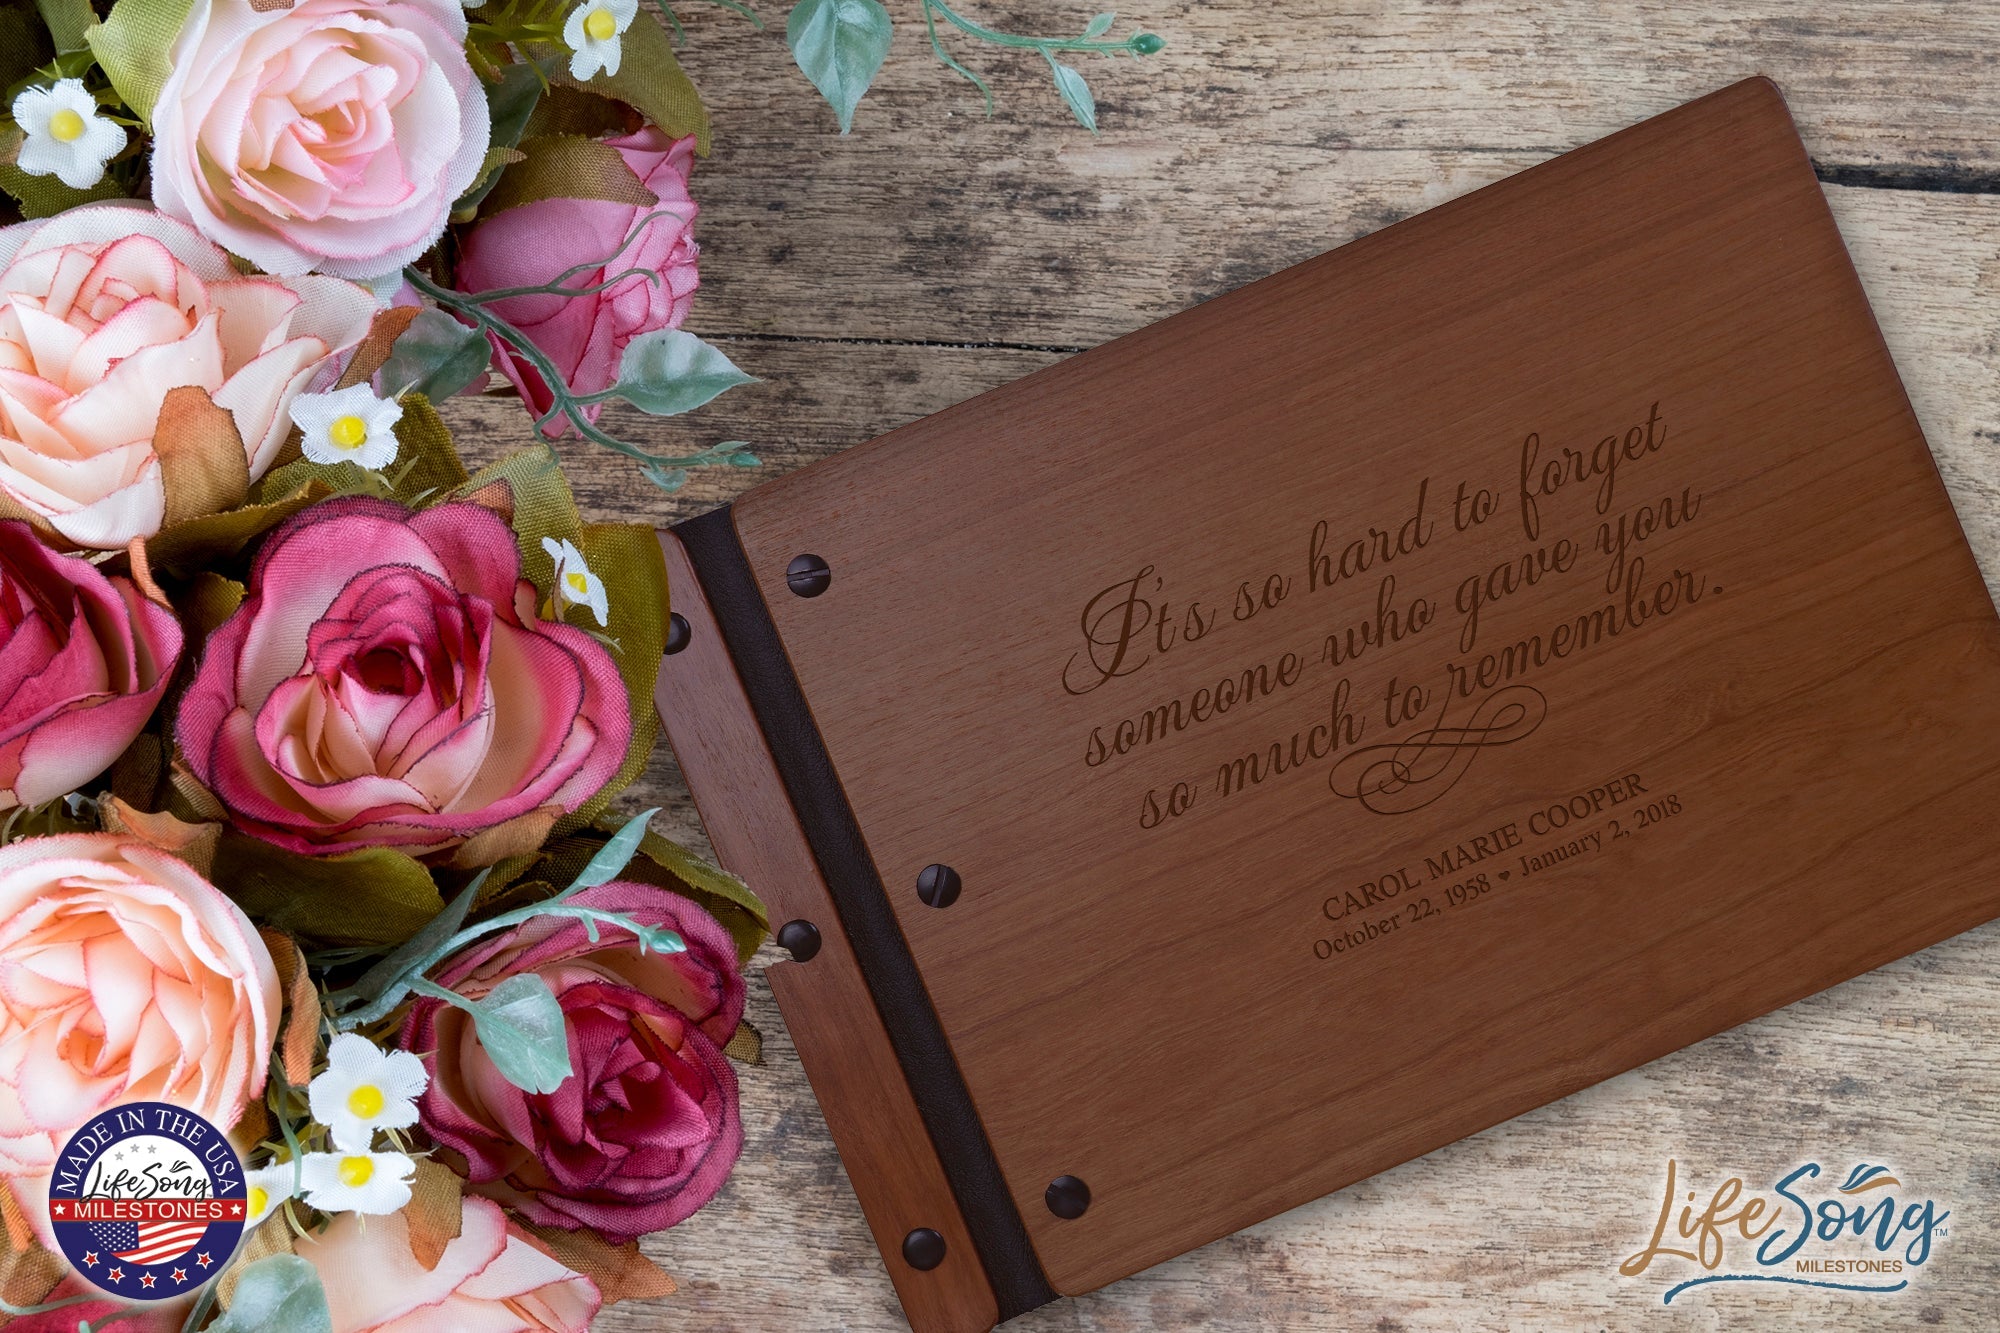 Personalized Memorial Guest Book - It's So Hard - LifeSong Milestones